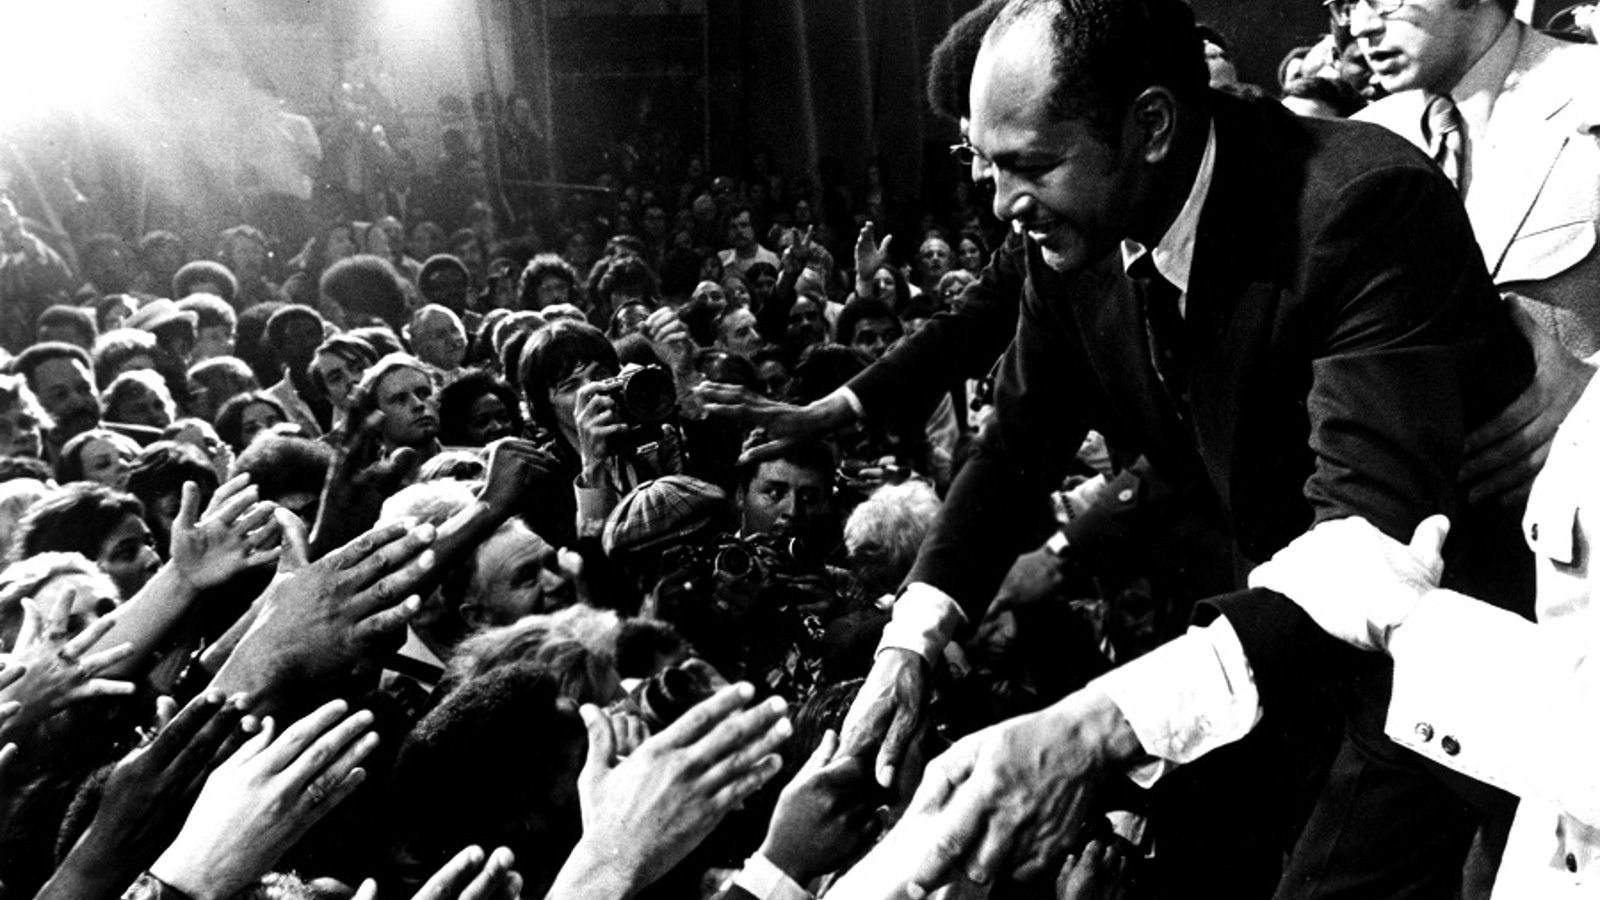 Bridging the Divide - Tom Bradley and the Politics of Race